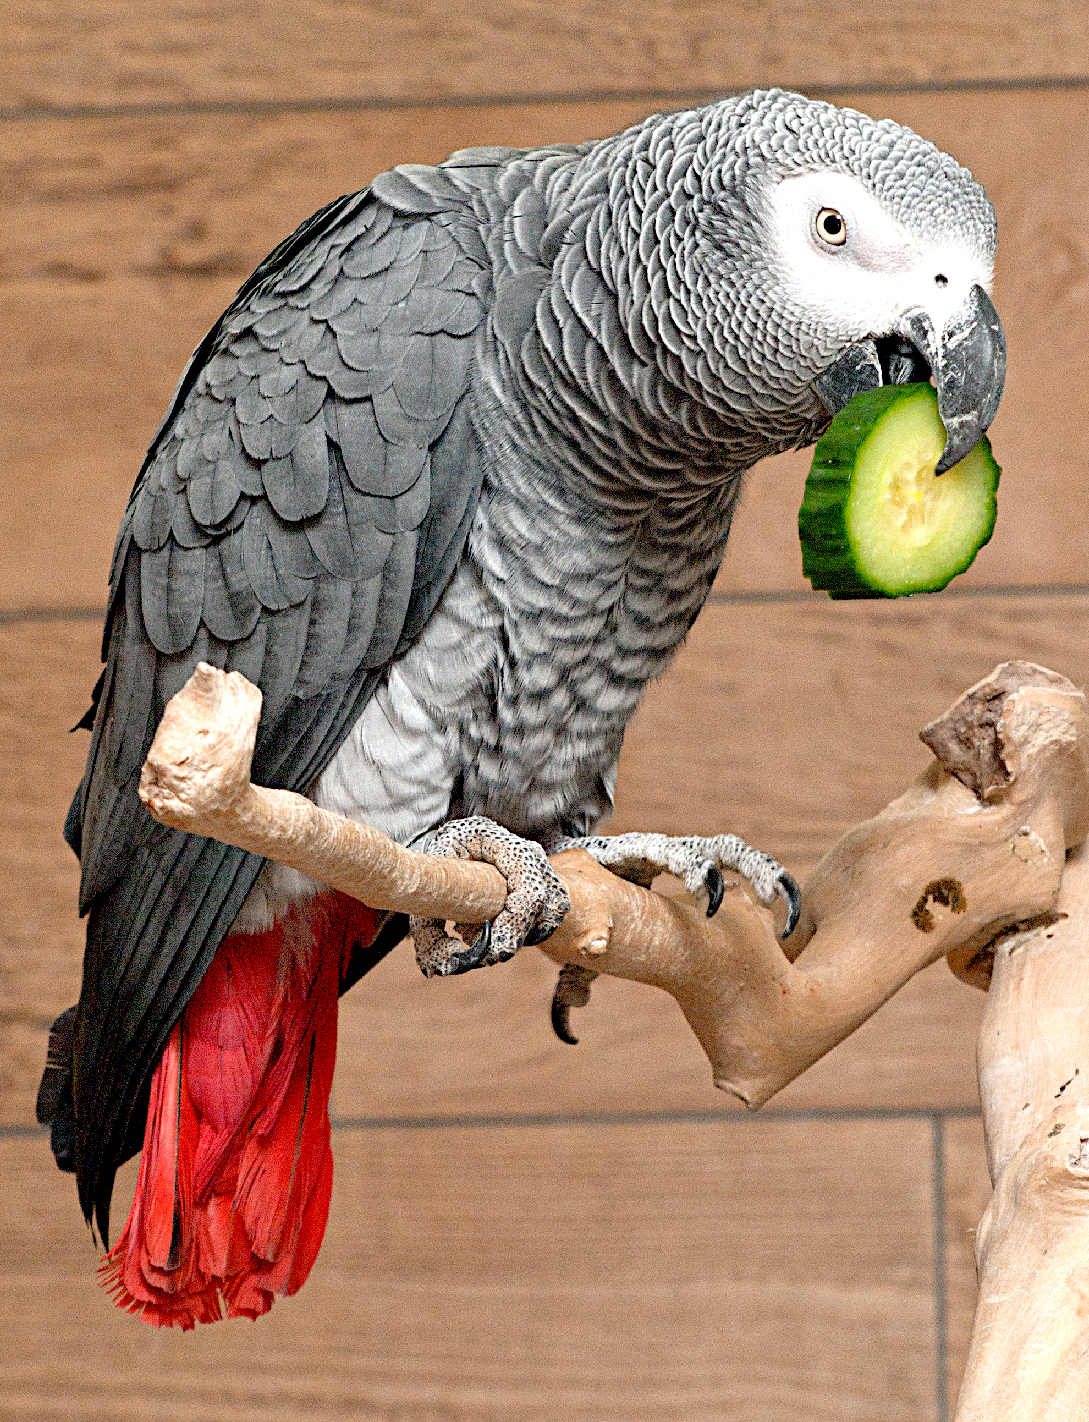 A very intelligent speaking grey parrot